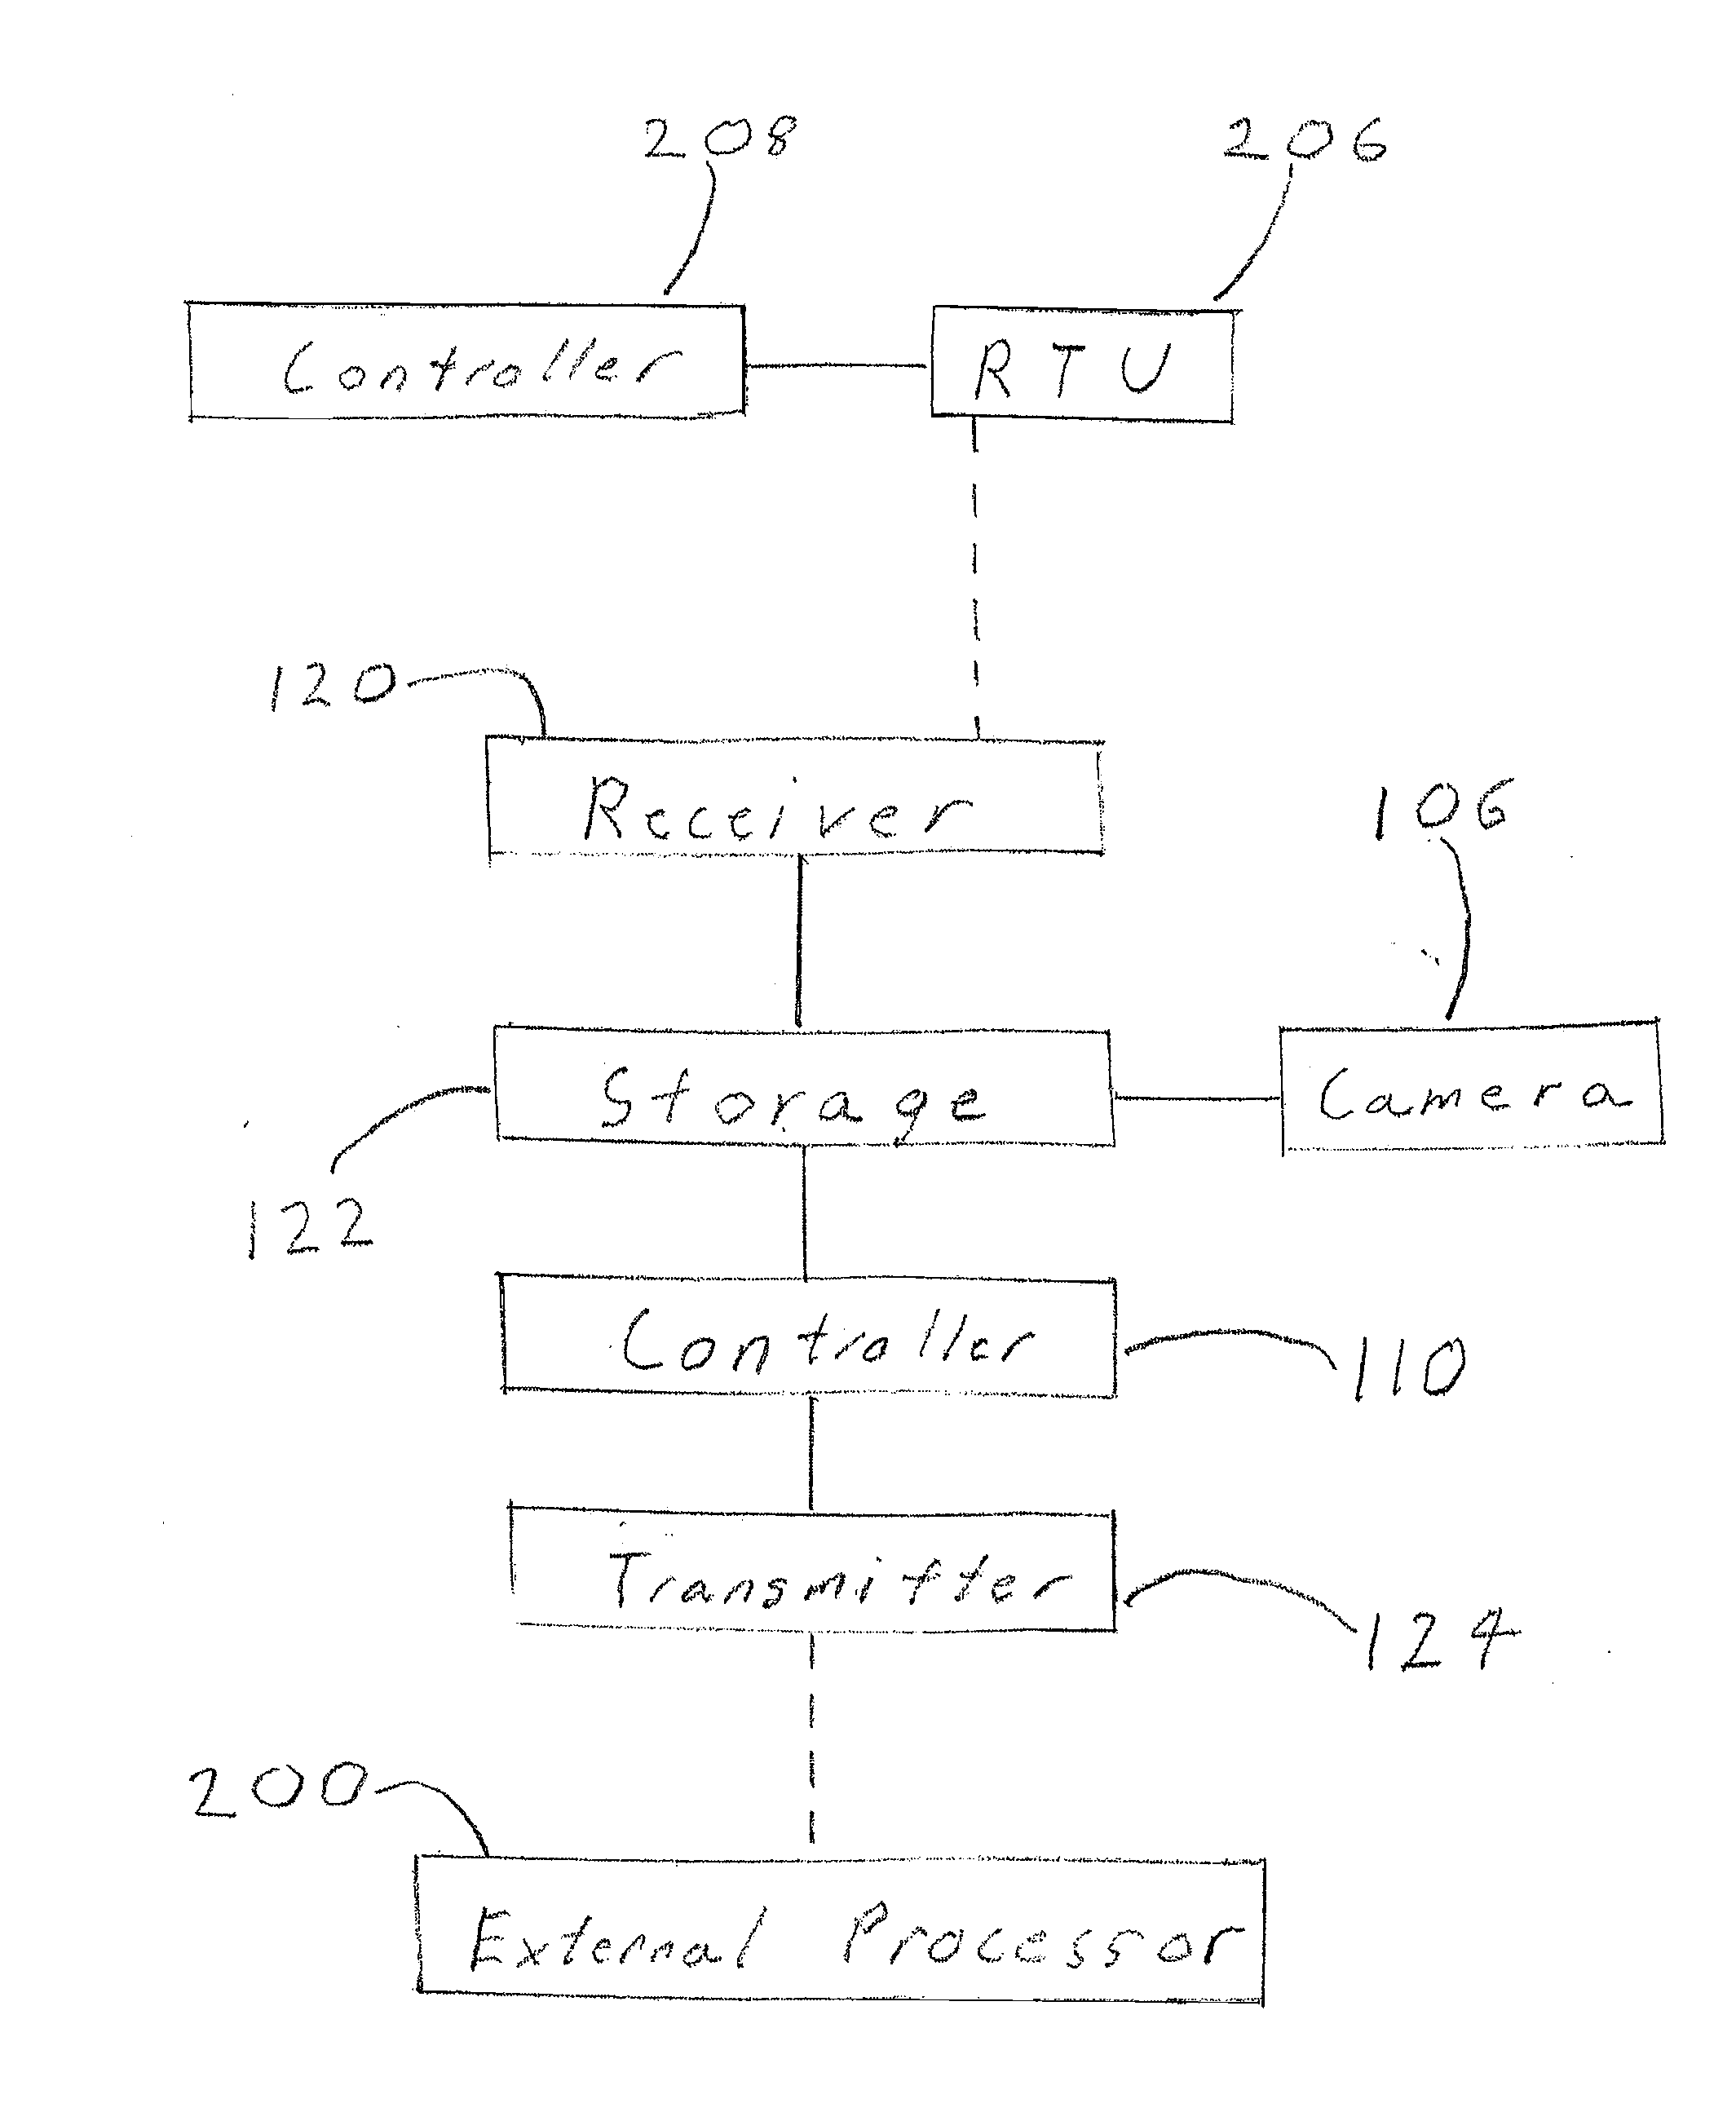 Systems, Methods and Devices for Collecting Data at Remote Oil and Natural Gas Sites